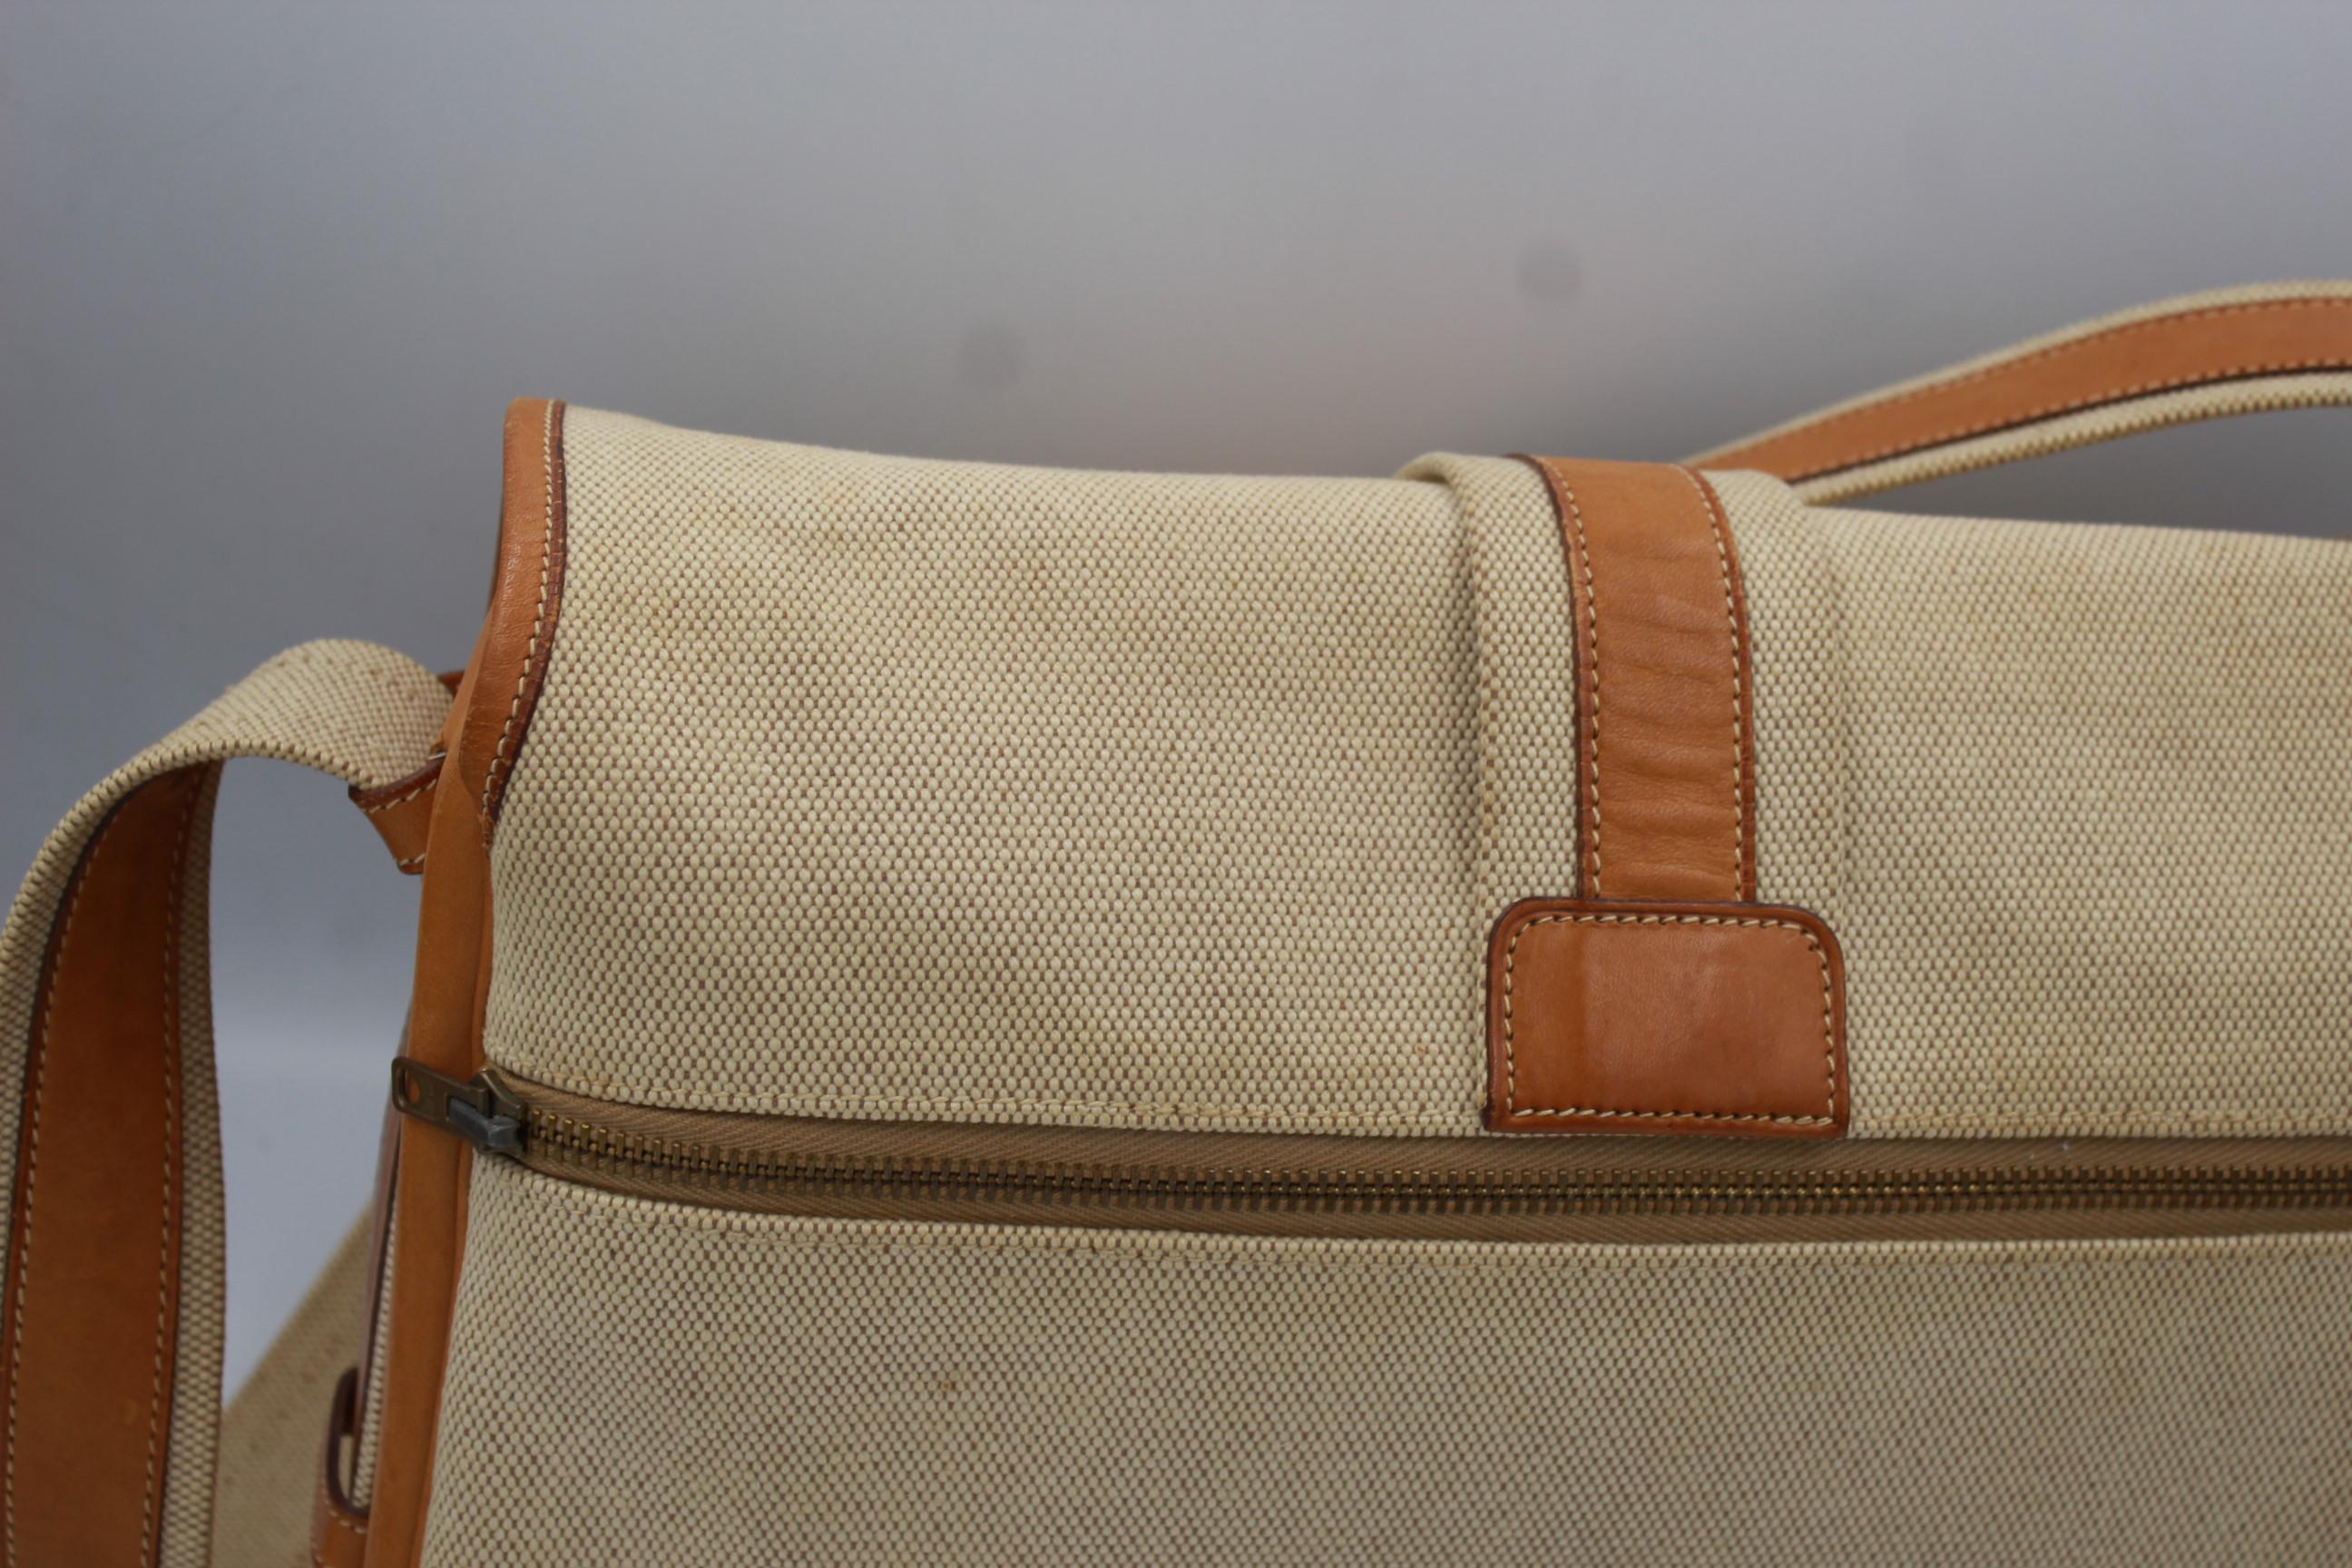 Vintage Hermes Noumea Messeger Bag in Leather and Canvas 1